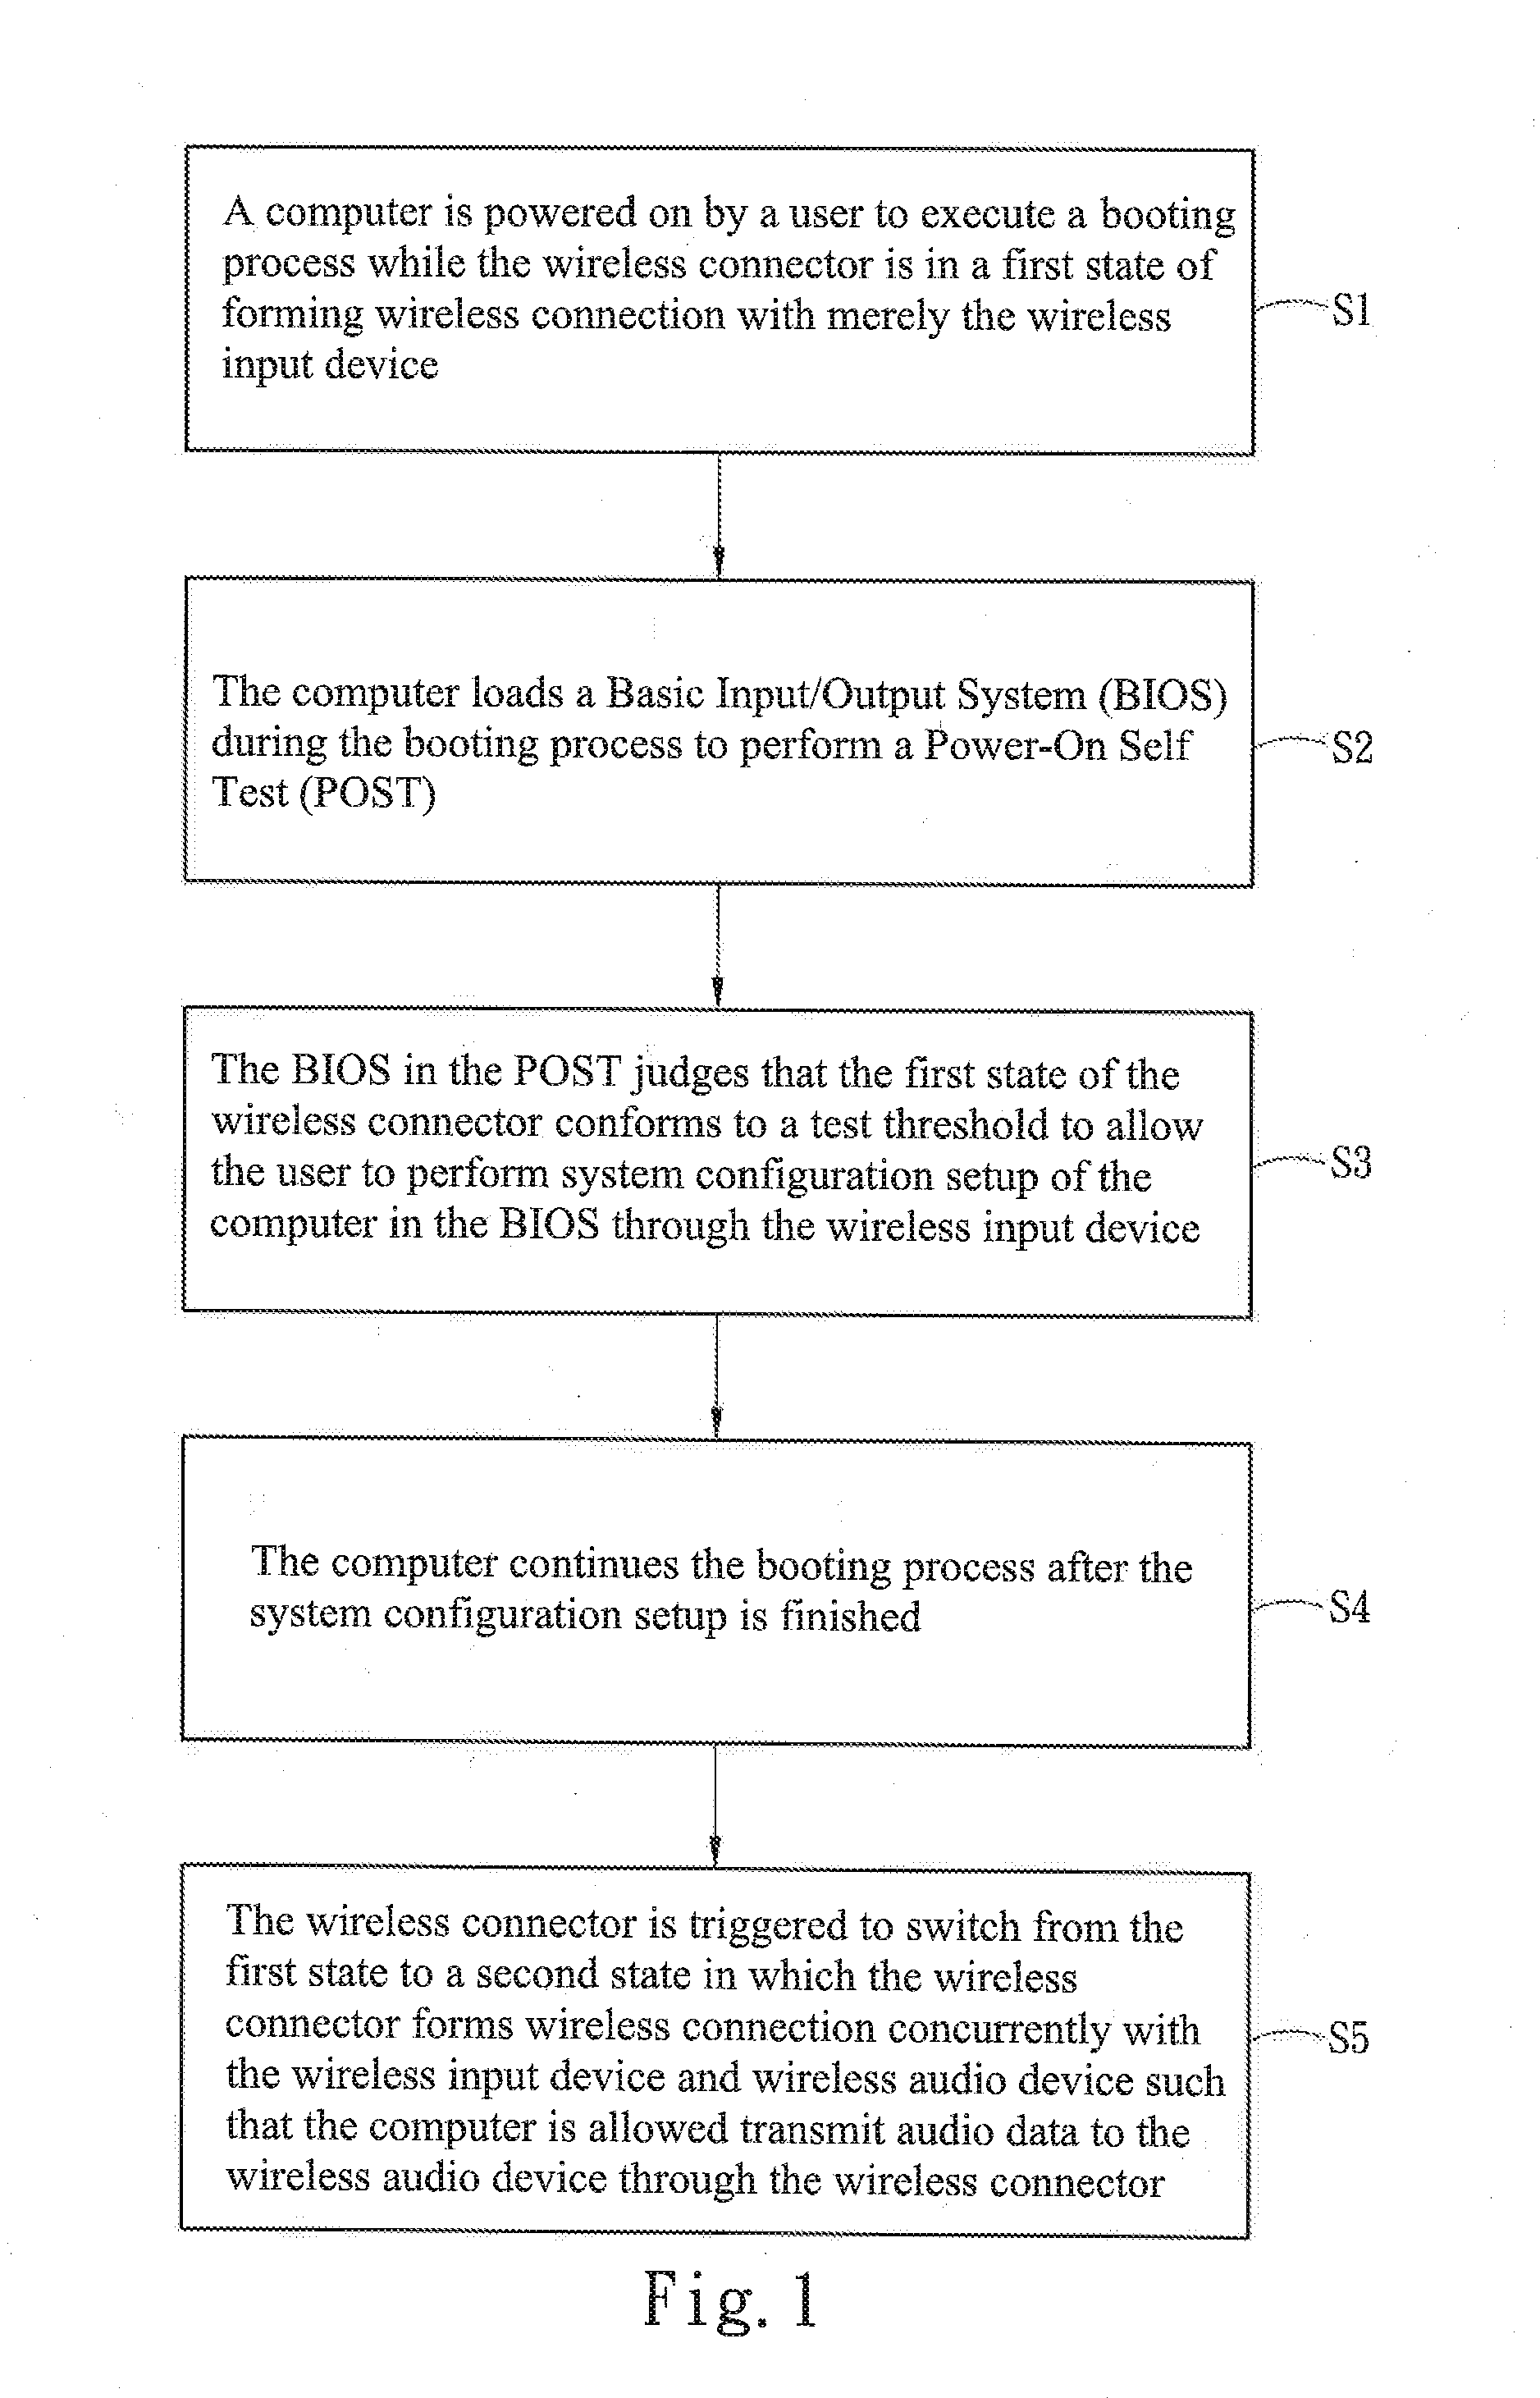 Method for setting system configuration of a computer connected with a one-to-many wireless device group during booting of the computer